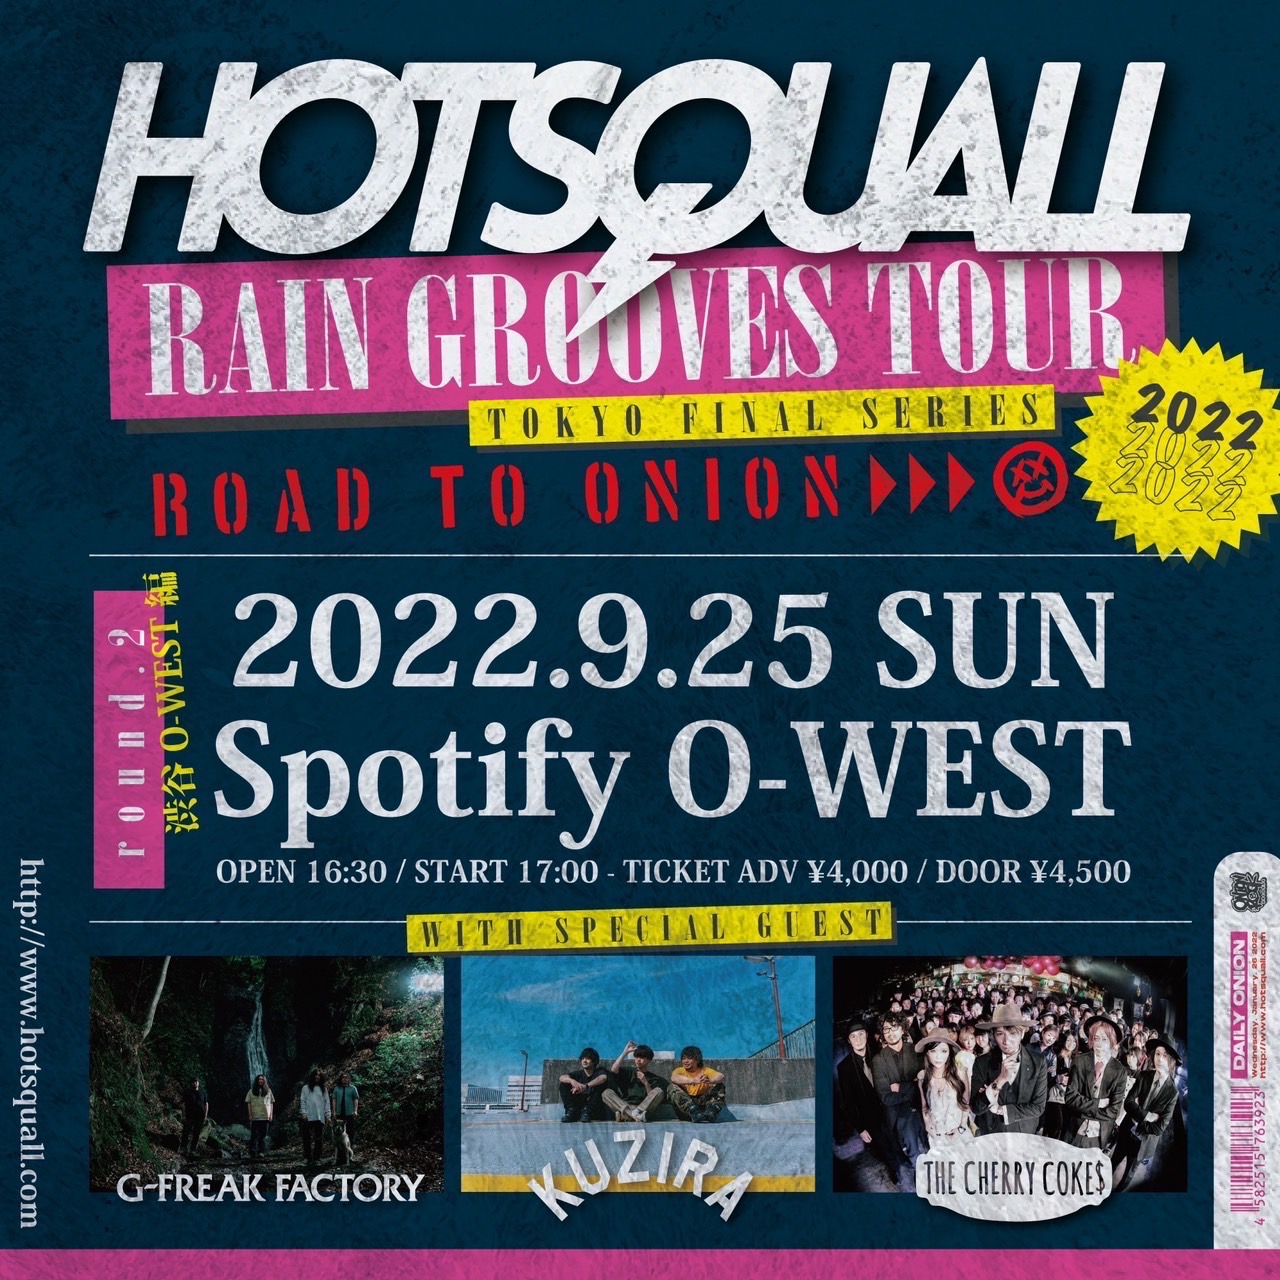 HOTSQUALL pre.”Road to ONION”〜RAIN GROOVES TOUR 2022 TOKYO FINAL 